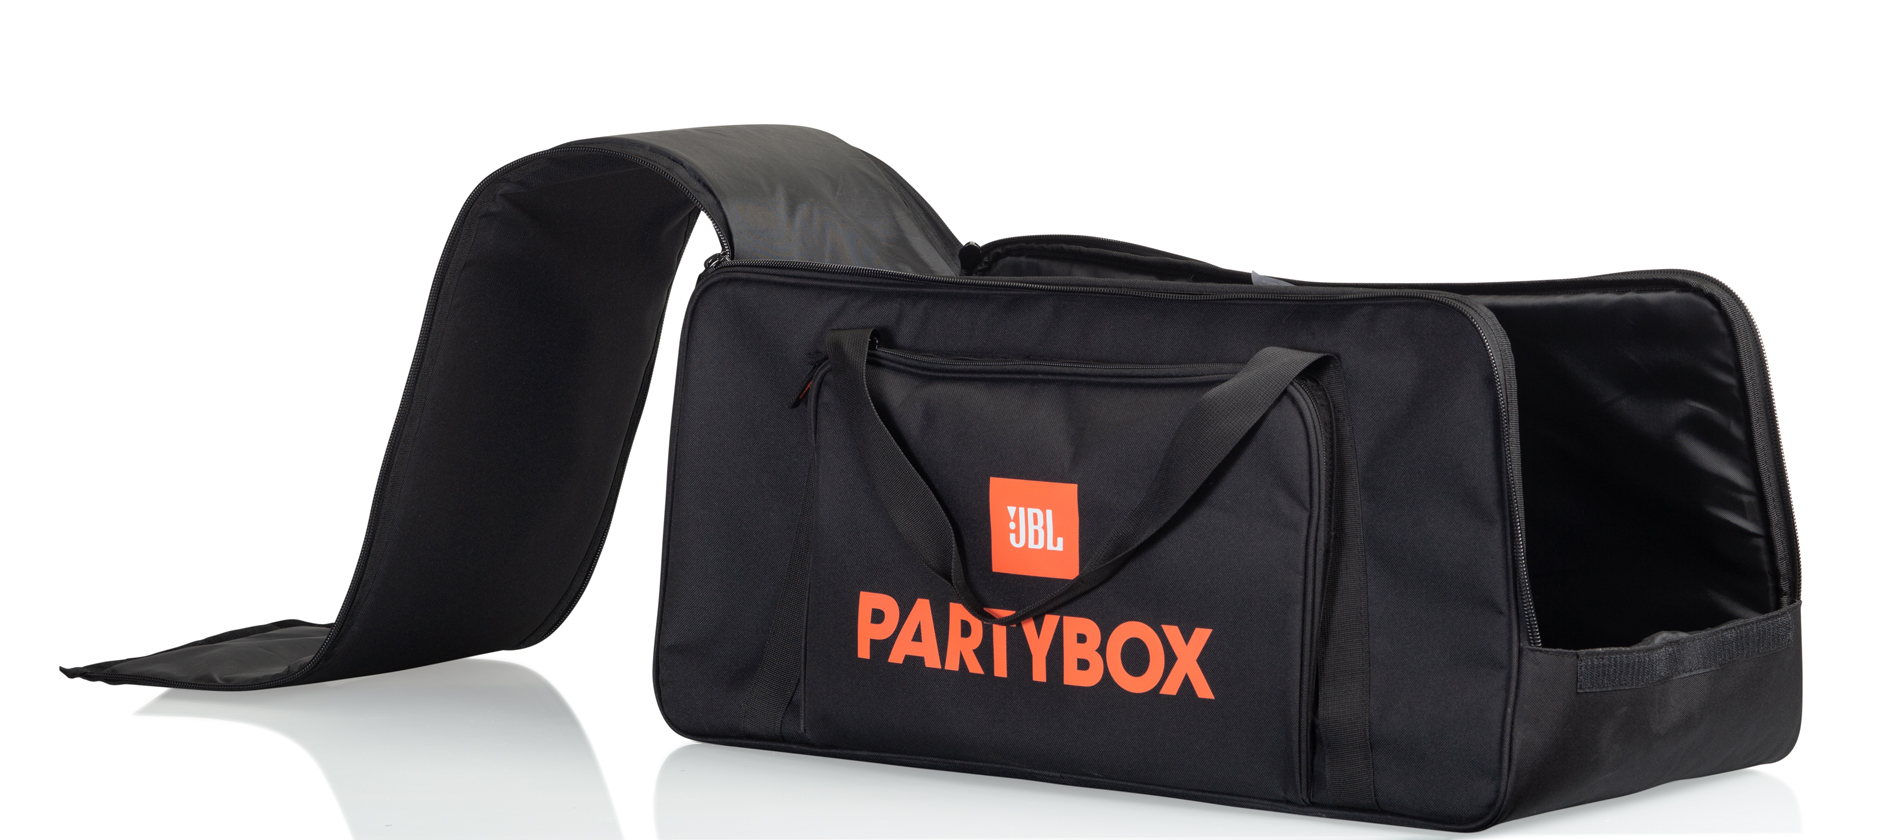 Convertible Cover for JBL Partybox 310 Speaker, Protective Carrying Bag for  JBL Partybox 310, Cover Case for JBL Partybox 310 